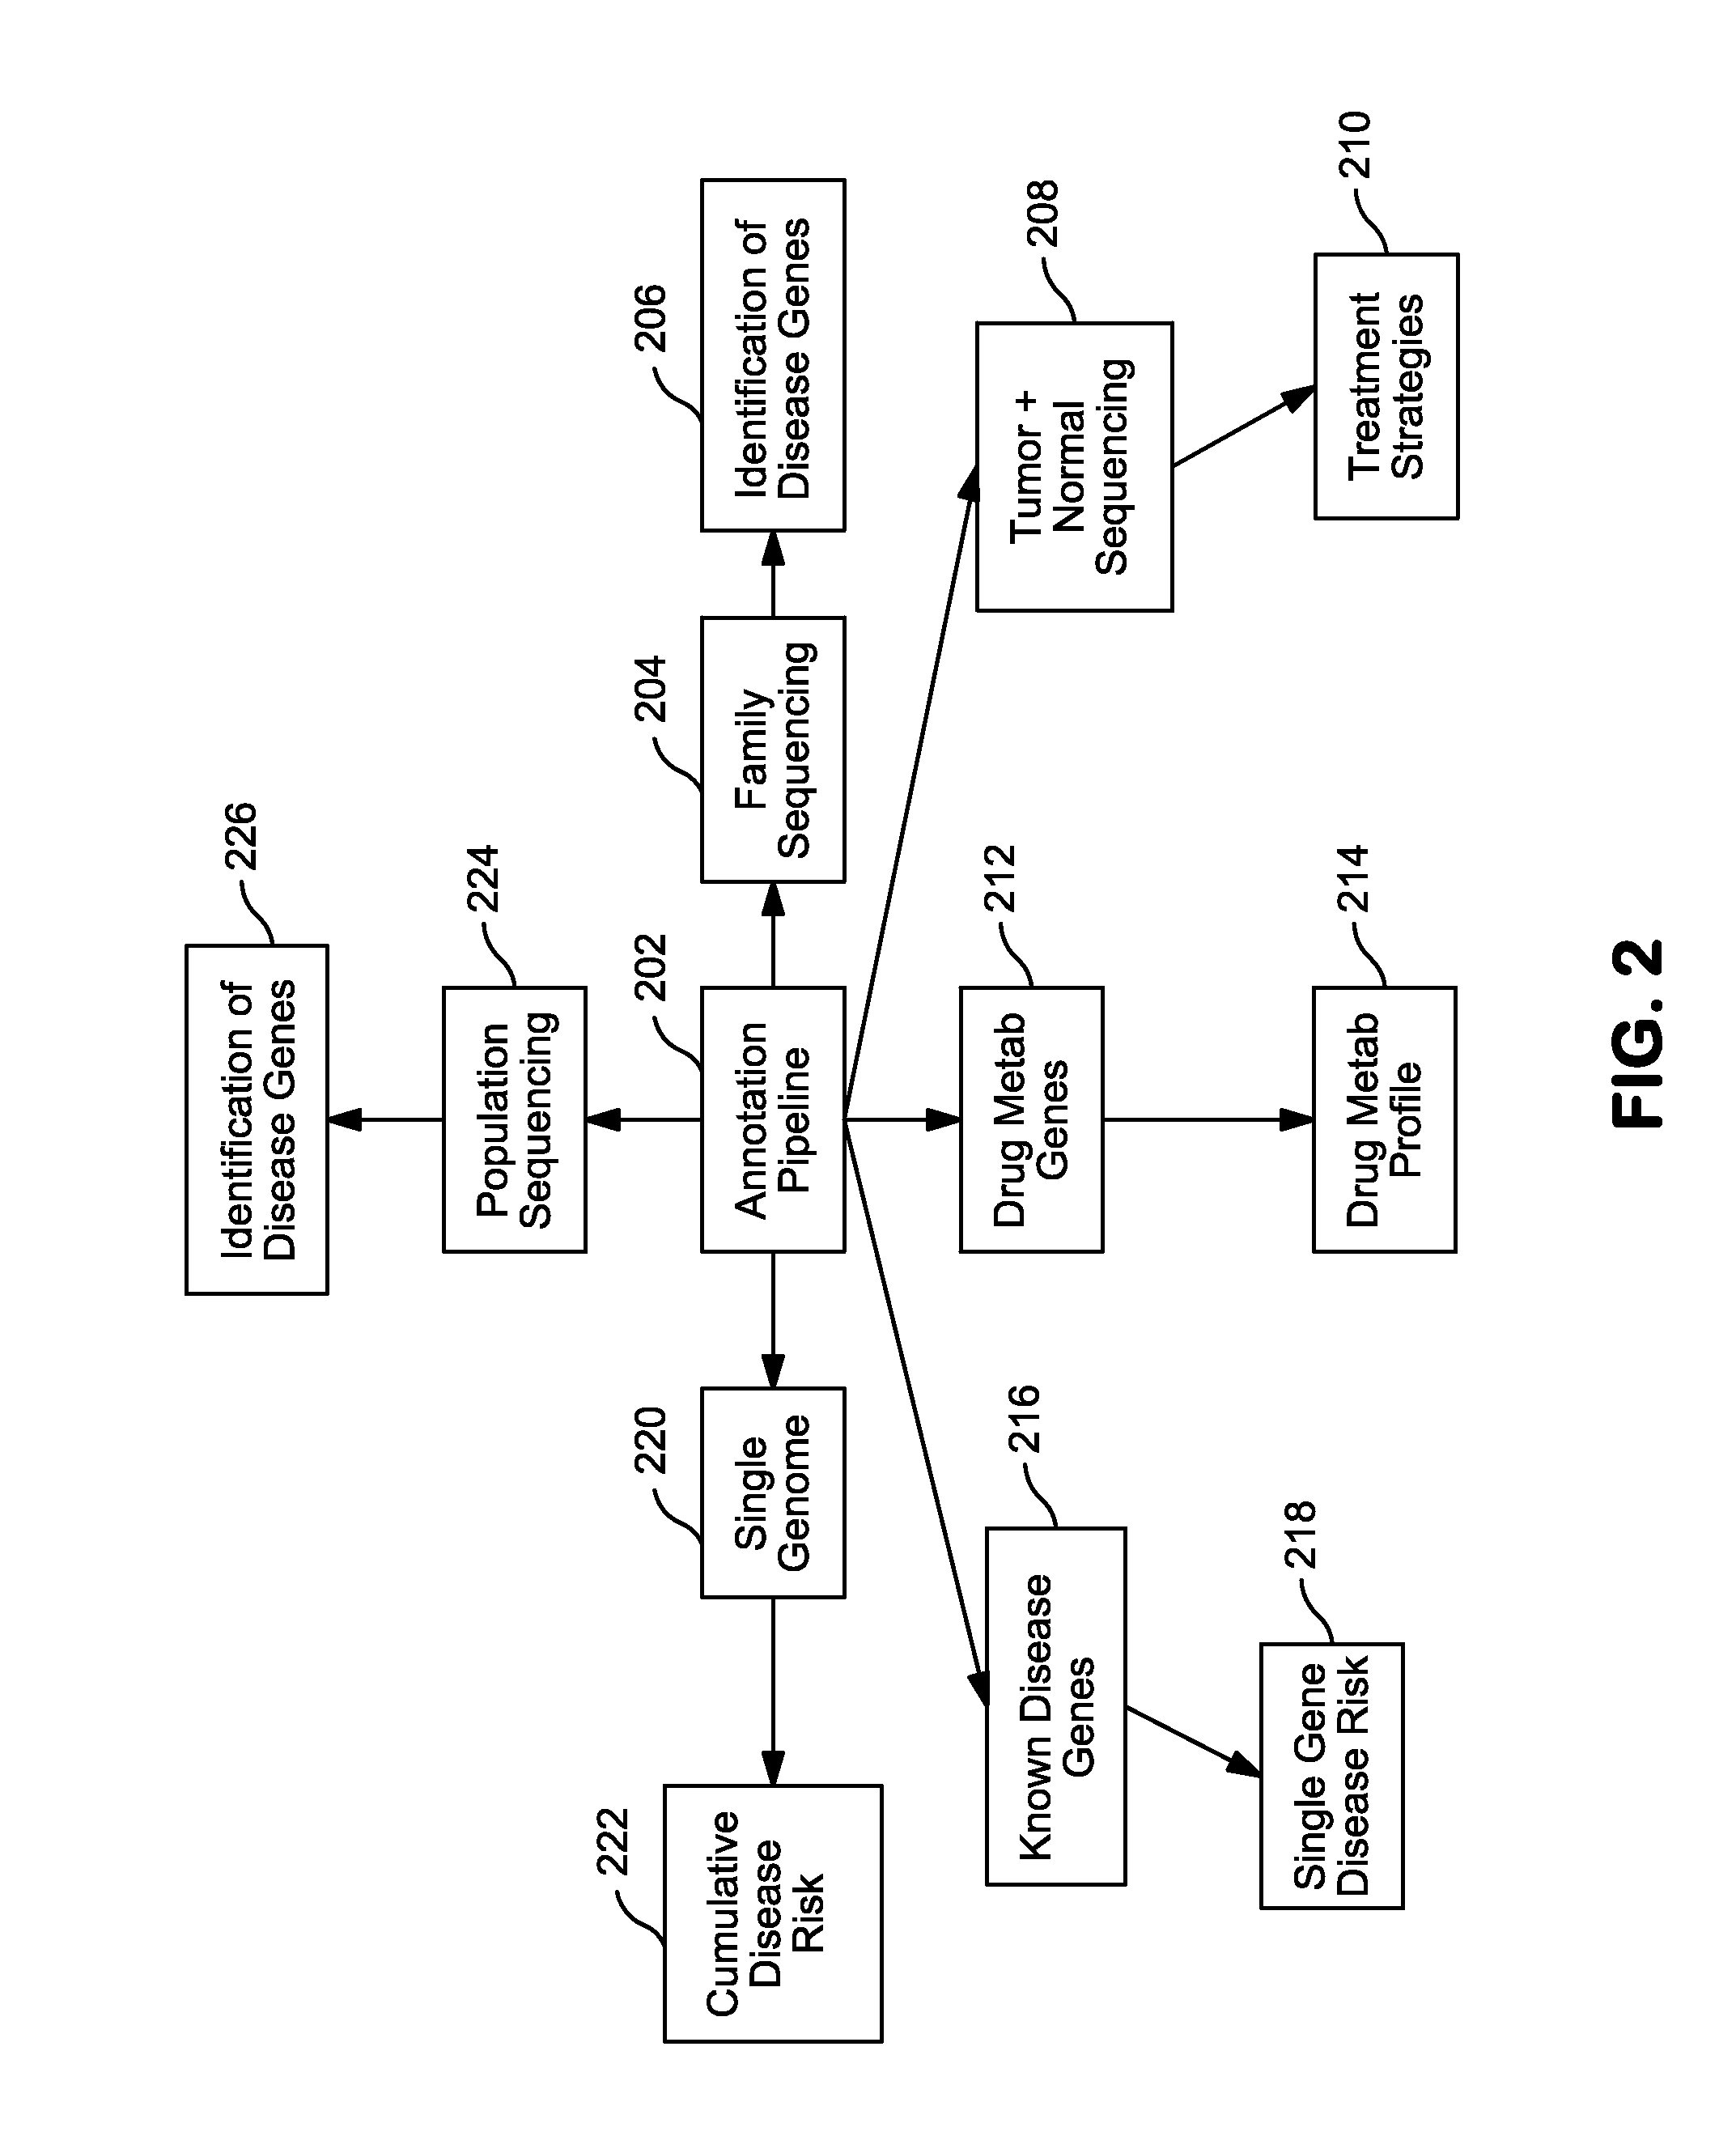 Systems and methods for genomic annotation and distributed variant interpretation